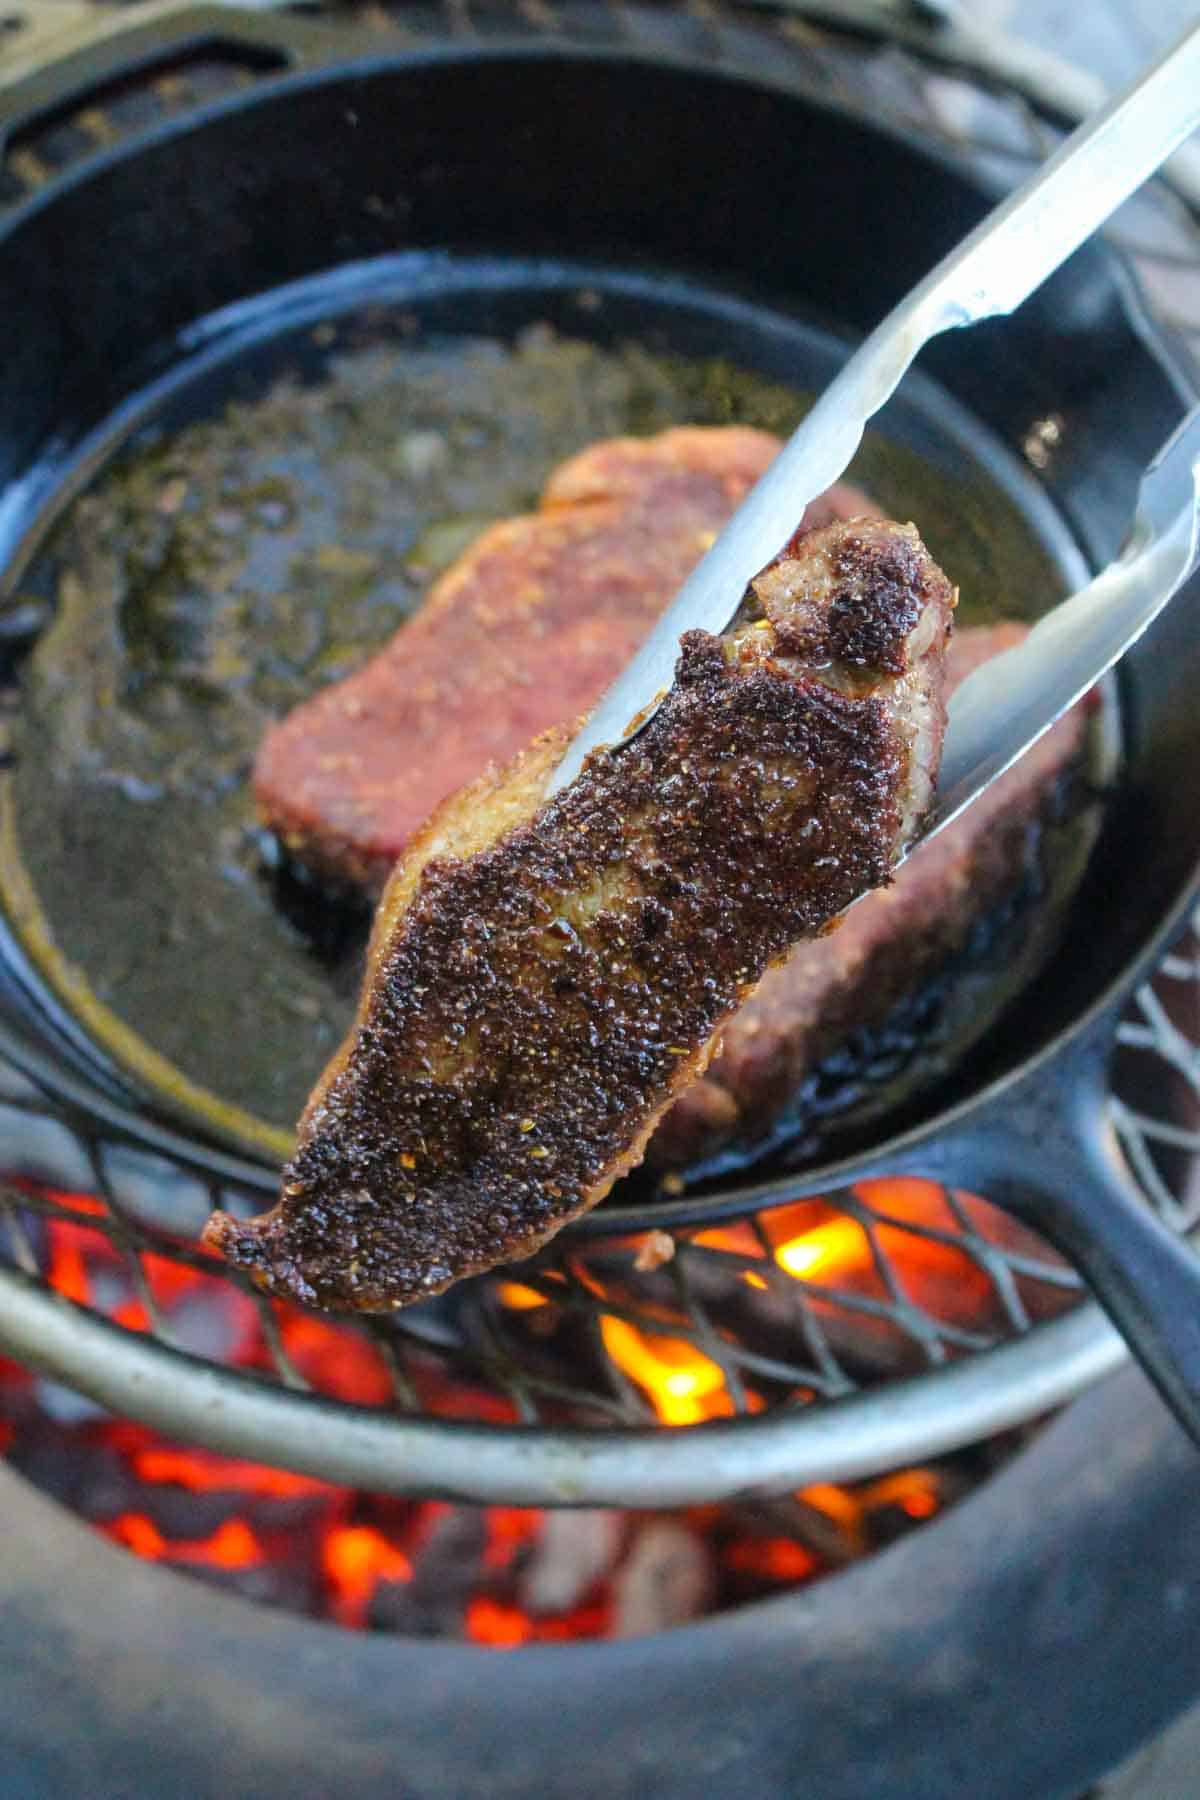 The flip and sear of the NY steaks.